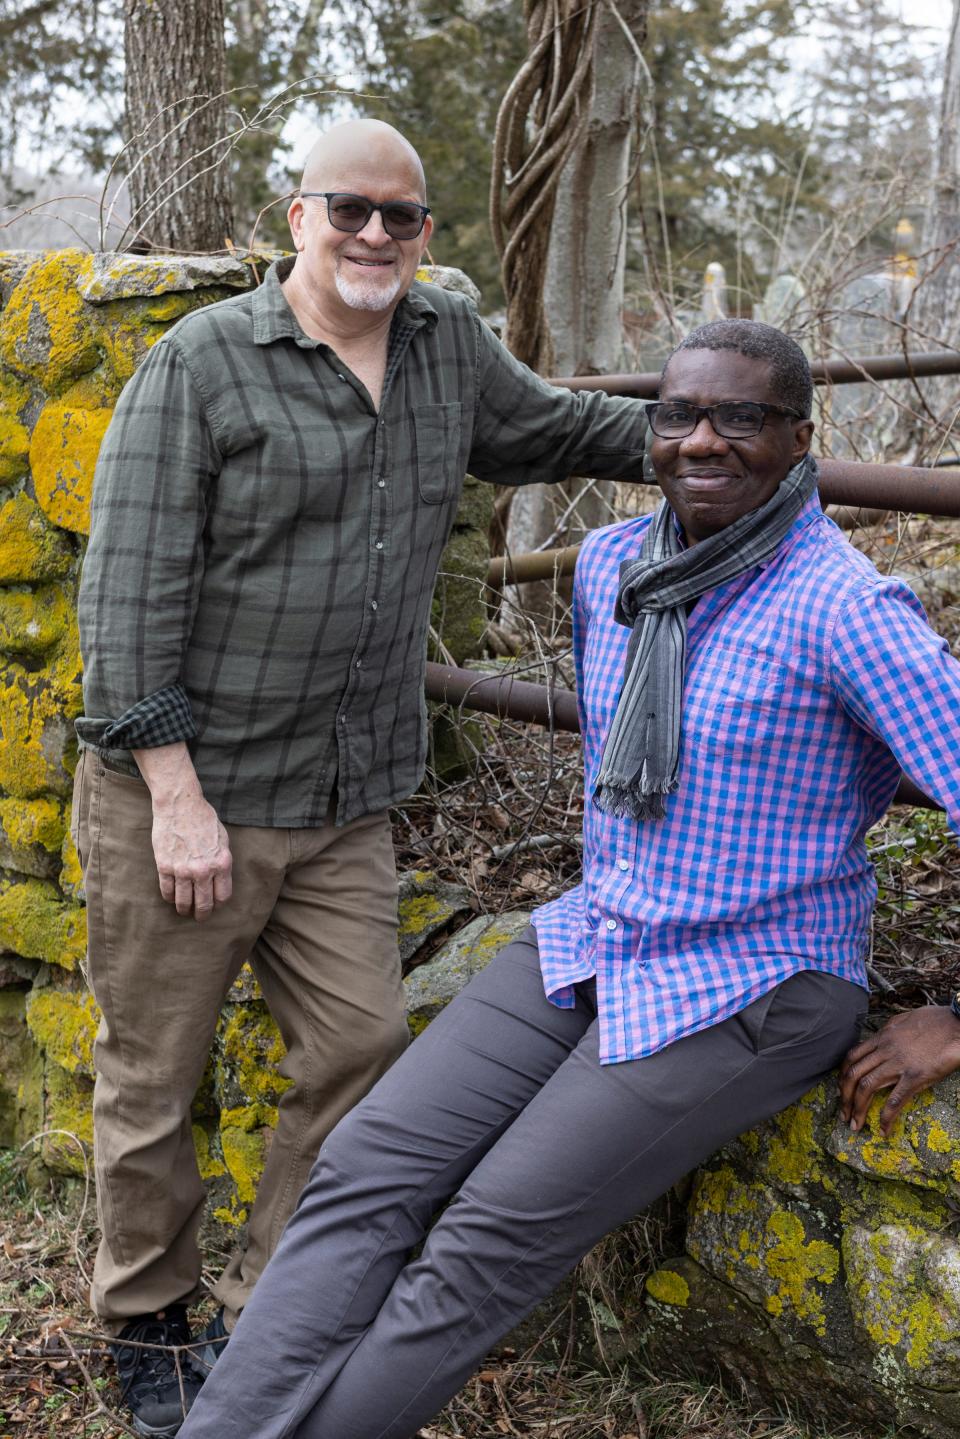 Artists Richard Neal, left, and Frank Anigbo will talk about pairing their visions for the "Fragile" exhibit at various public programs at the Cape Cod Museum of Art.